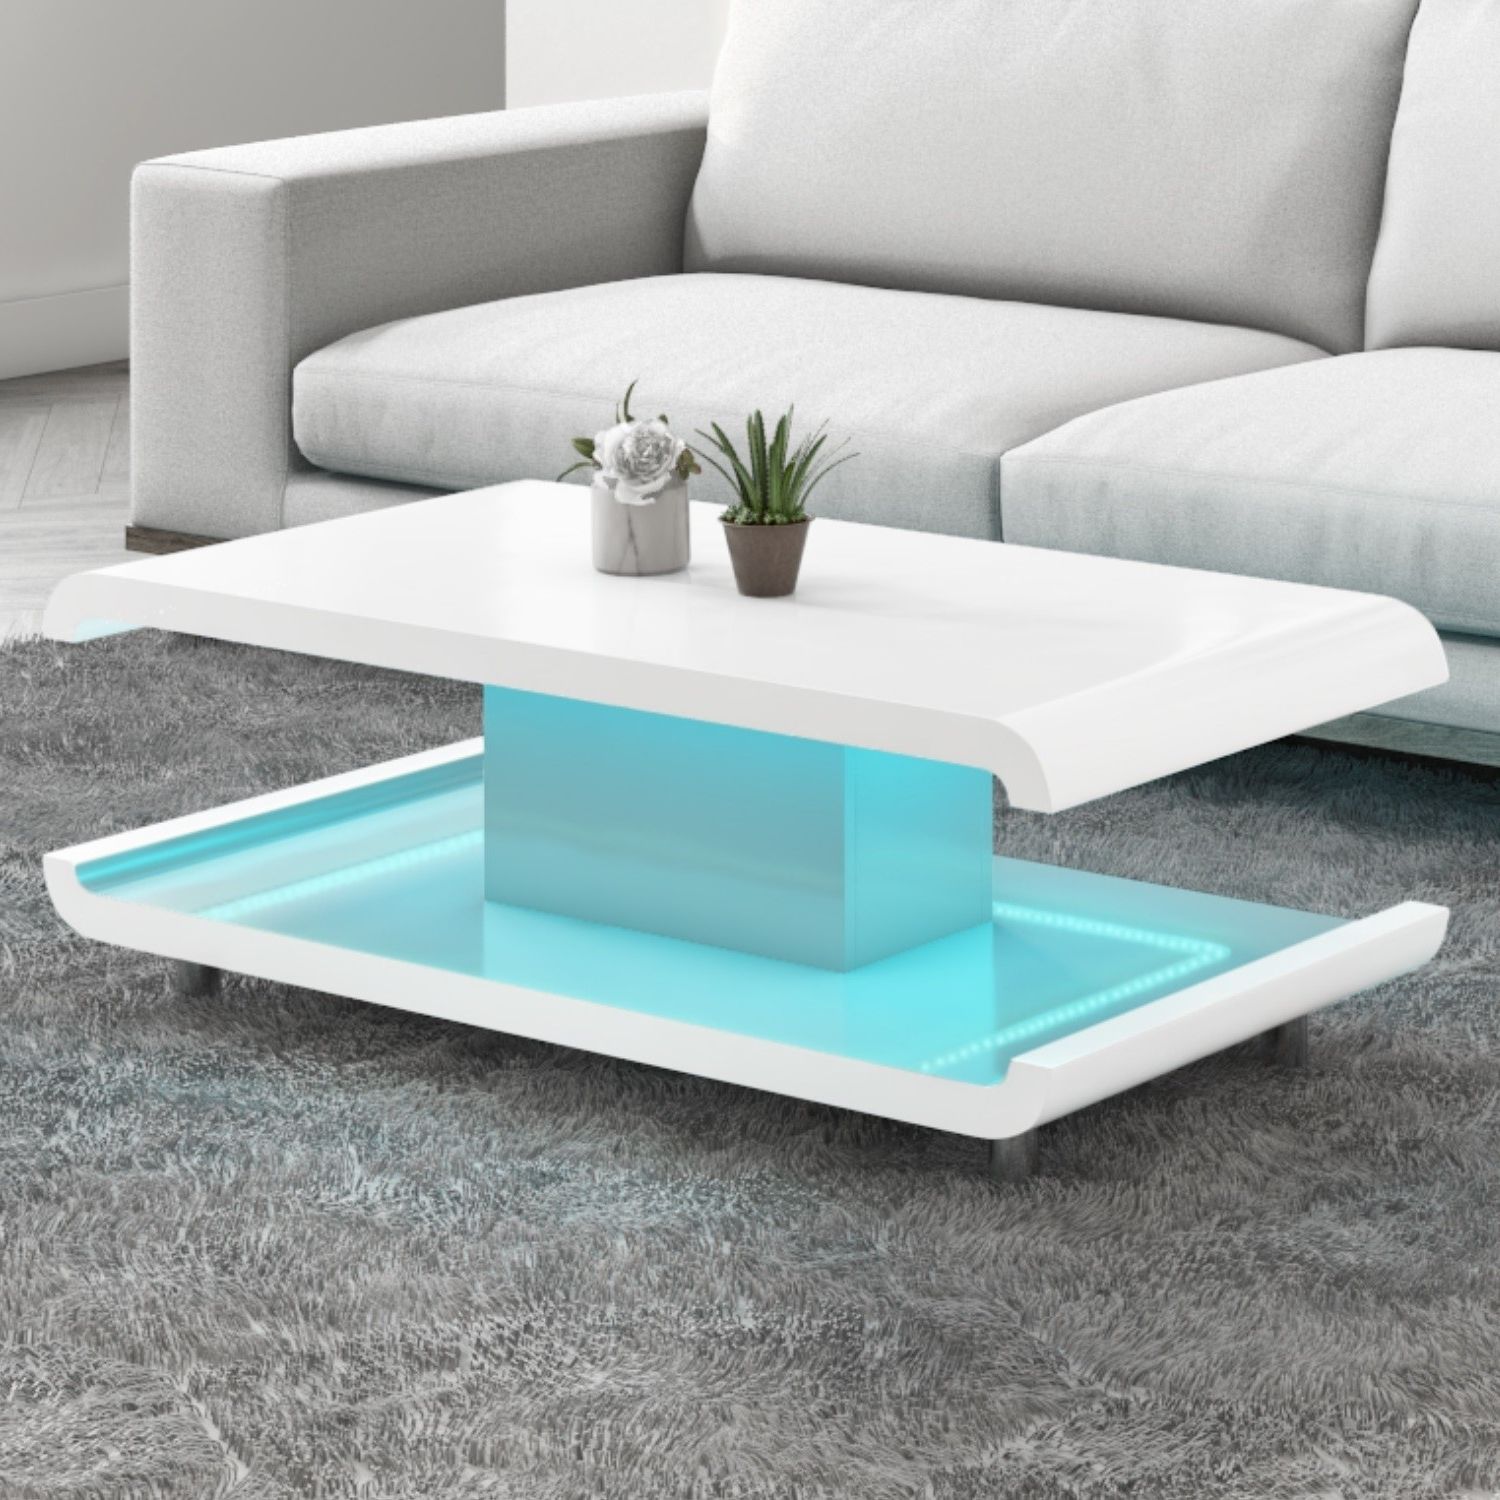 High Gloss White Coffee Table Led Range | Offer Of The Day Pertaining To Coffee Tables With Led Lights (Gallery 10 of 20)